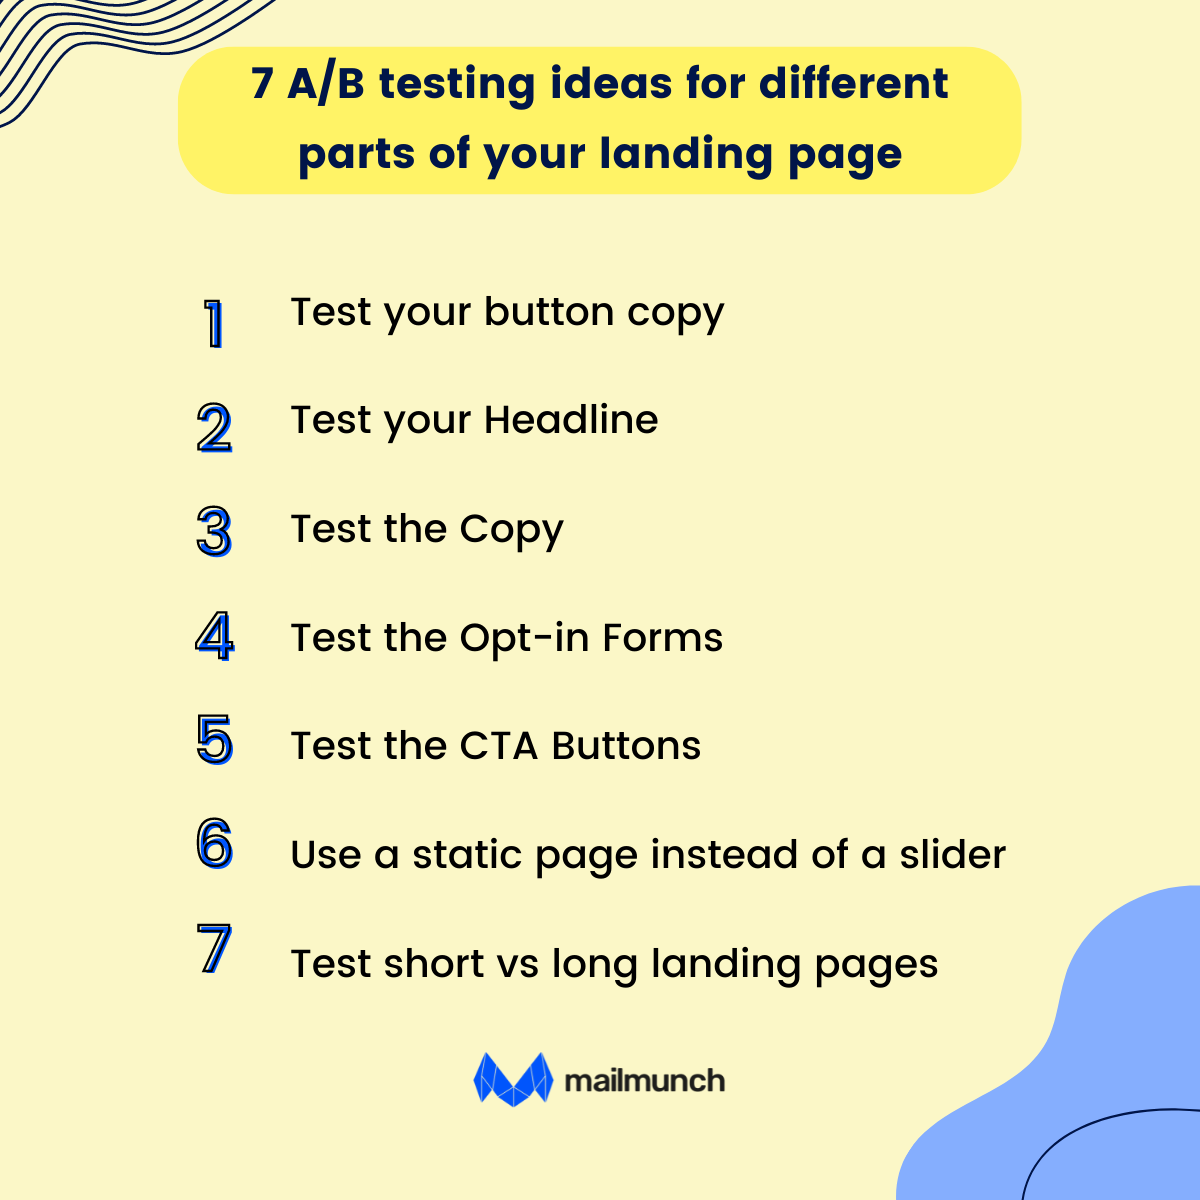 visual about what to test on landing page 